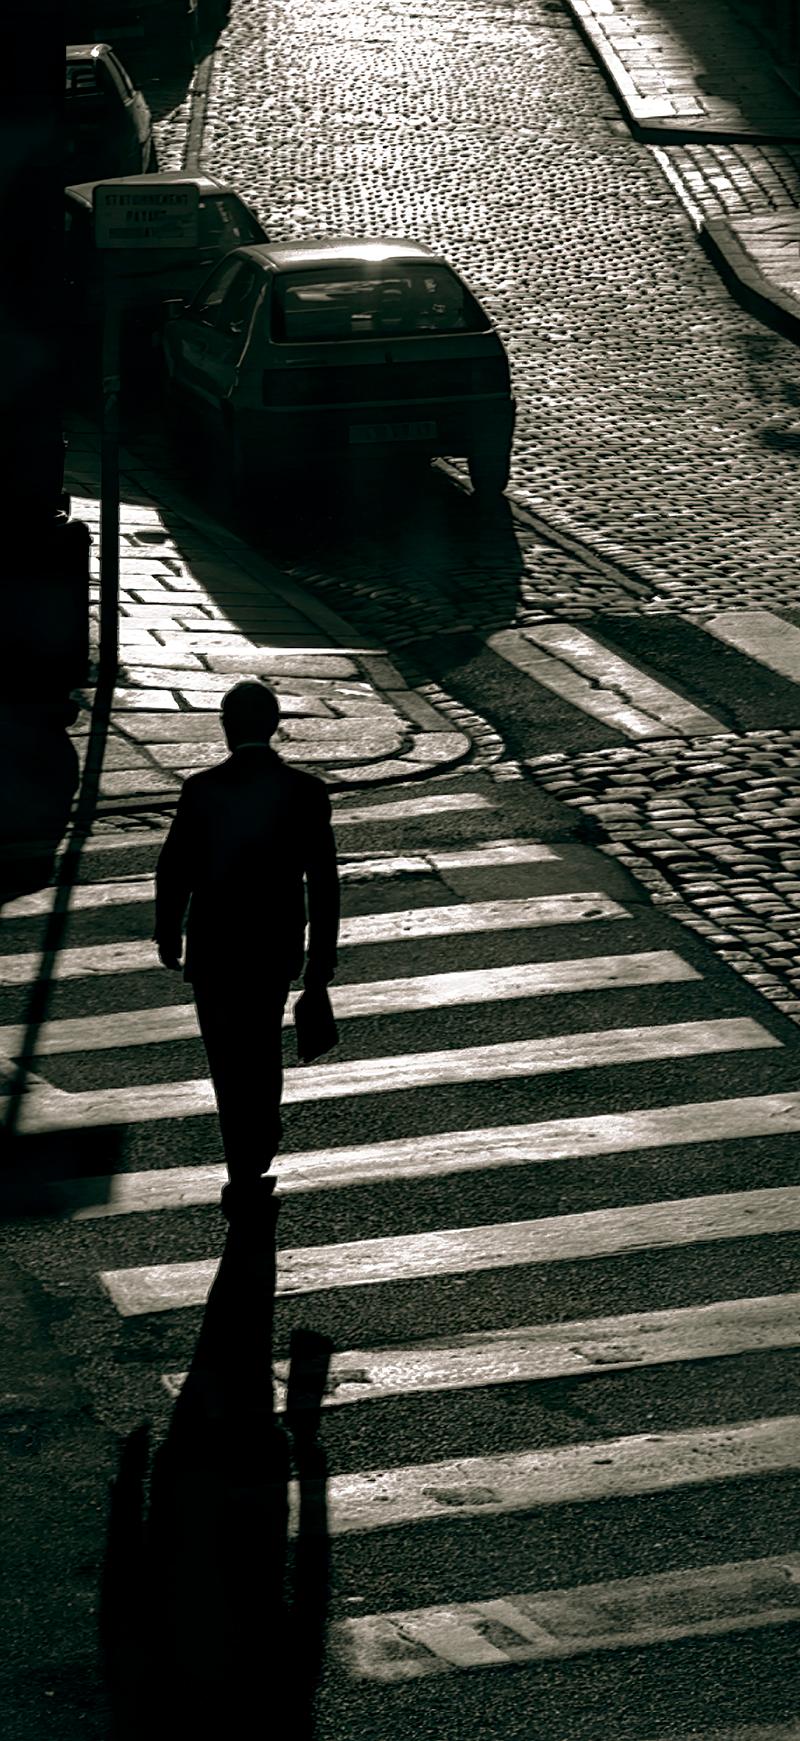 Man walking - Limited edition pigment print  -   Limited Editions of 5
France, 2003
Signed + numbered by artist with certificate of authenticity. 
Free delivery

Archival pigment print available sizes ( Image size , the white margin is not counted)